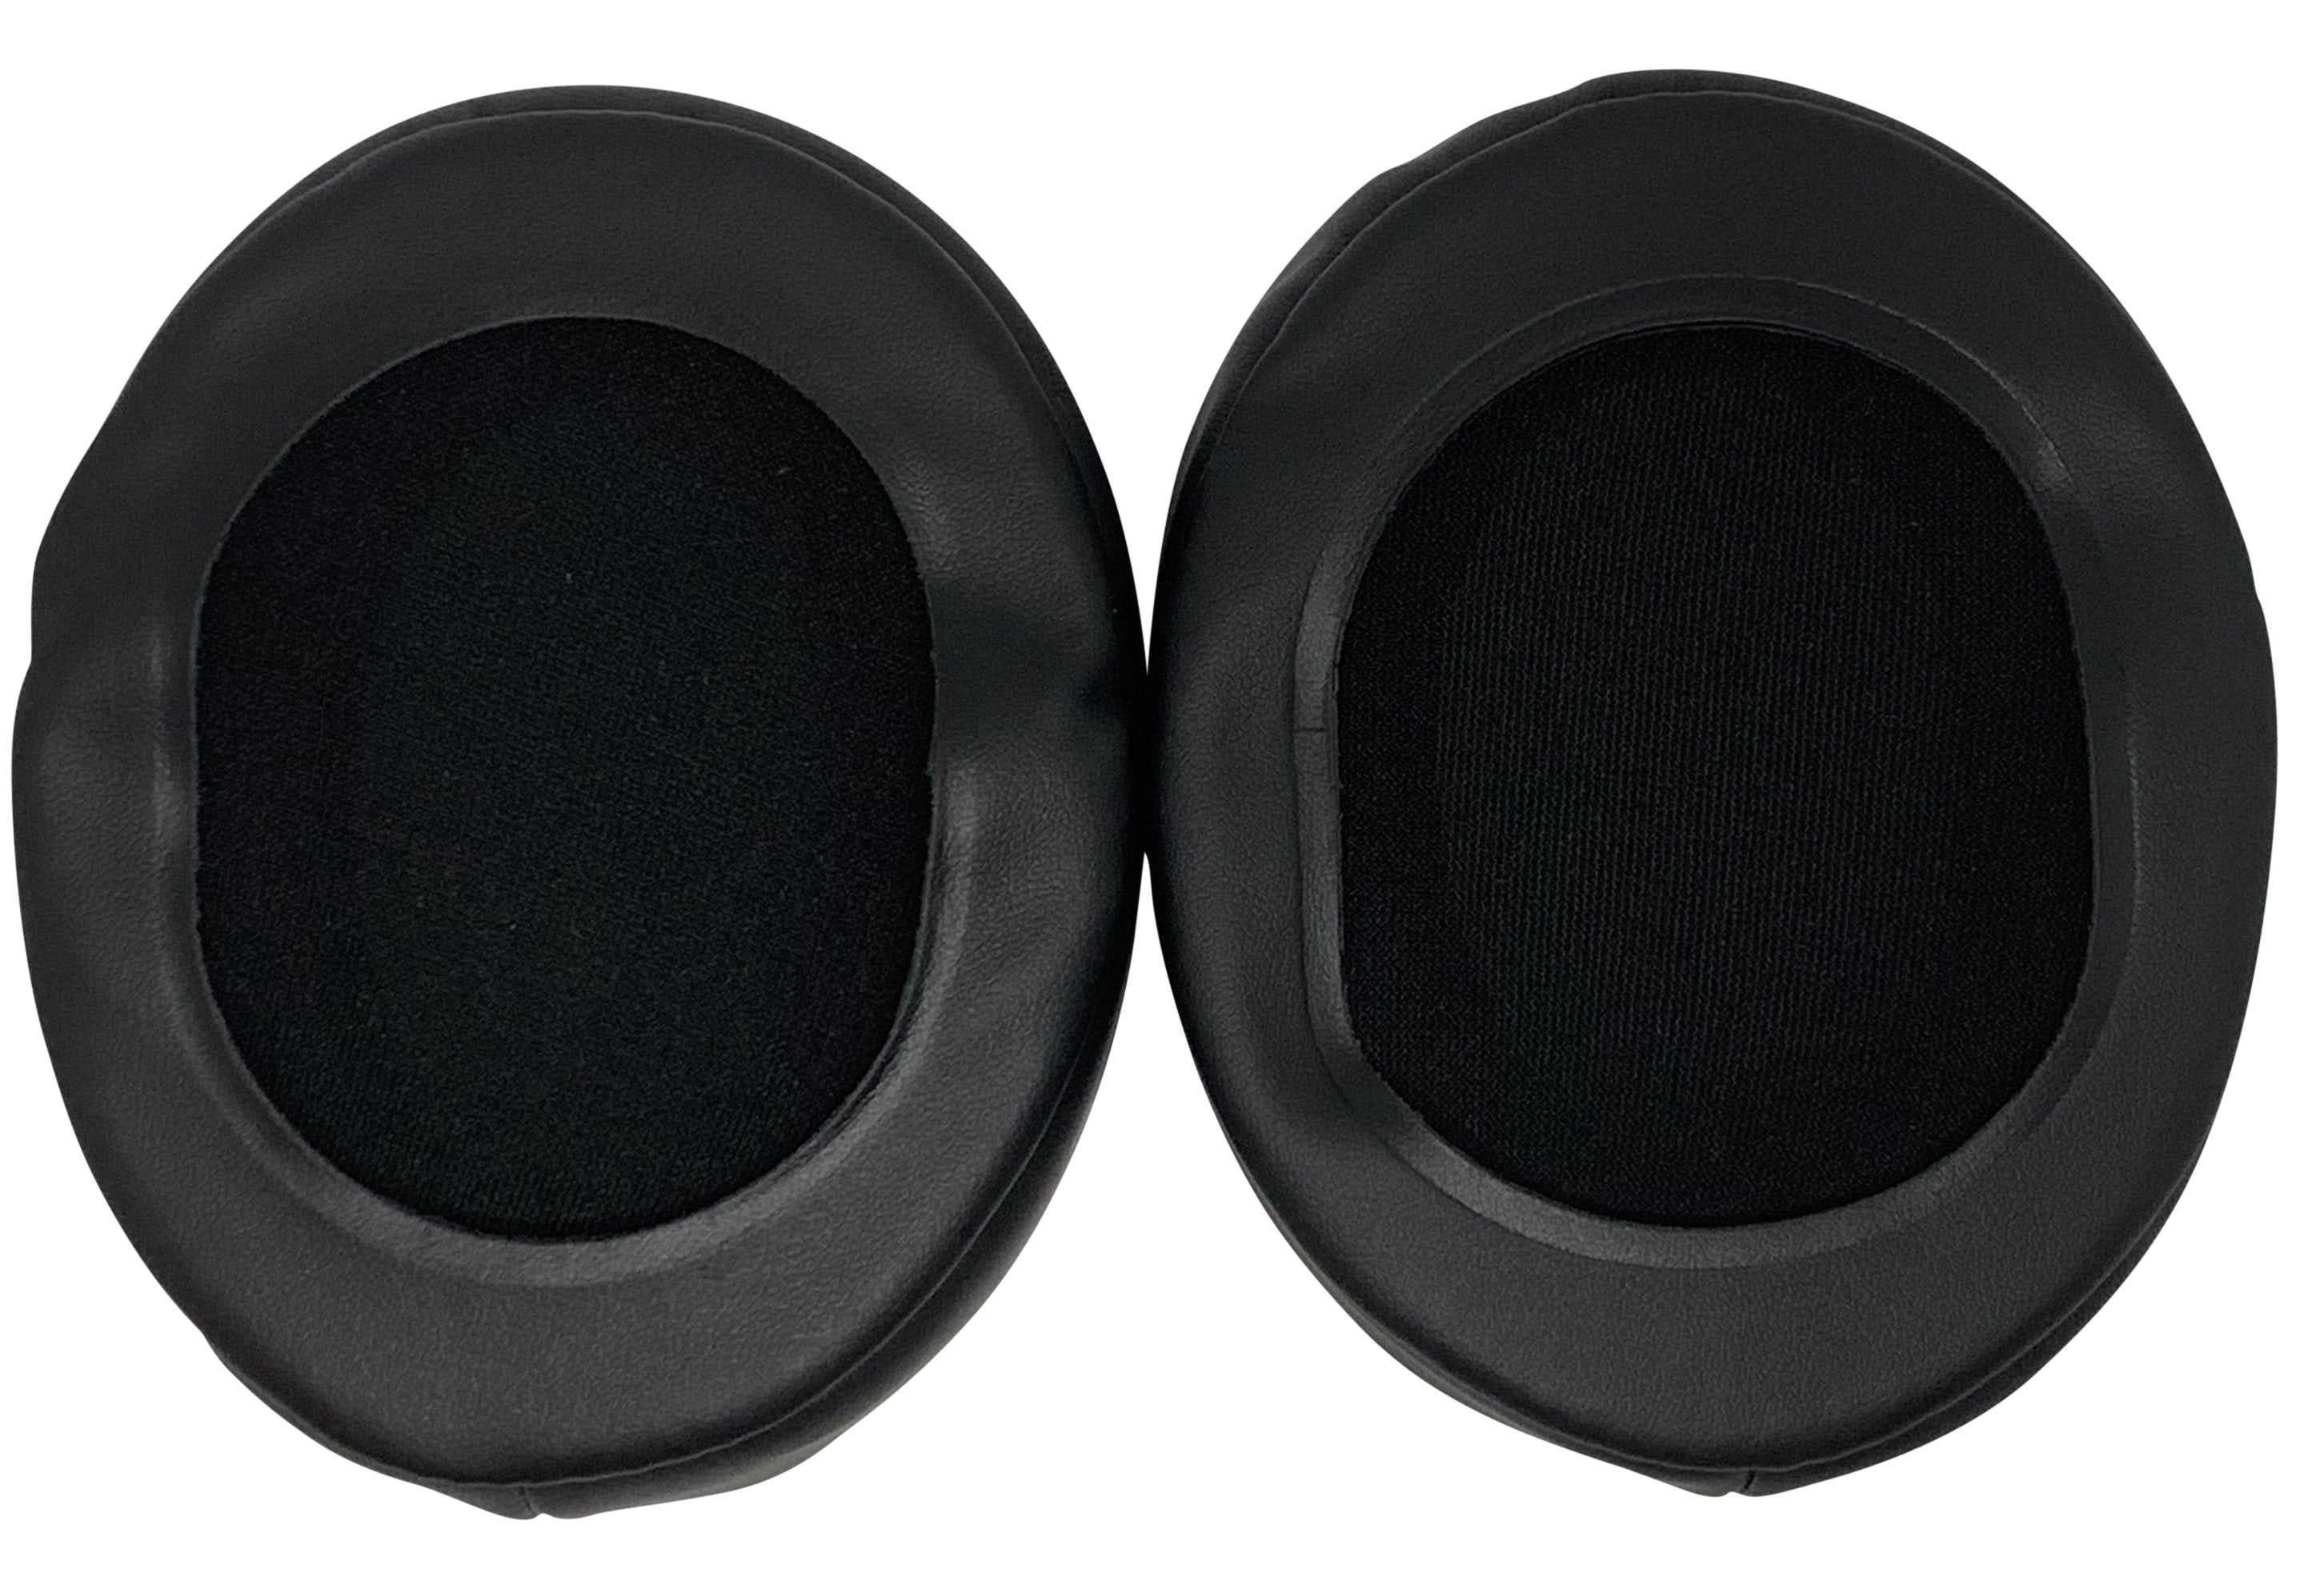 CentralSound Premium Replacement Ear Pad Cushions for Philips Fidelio L1 L2 L2BO - CentralSound